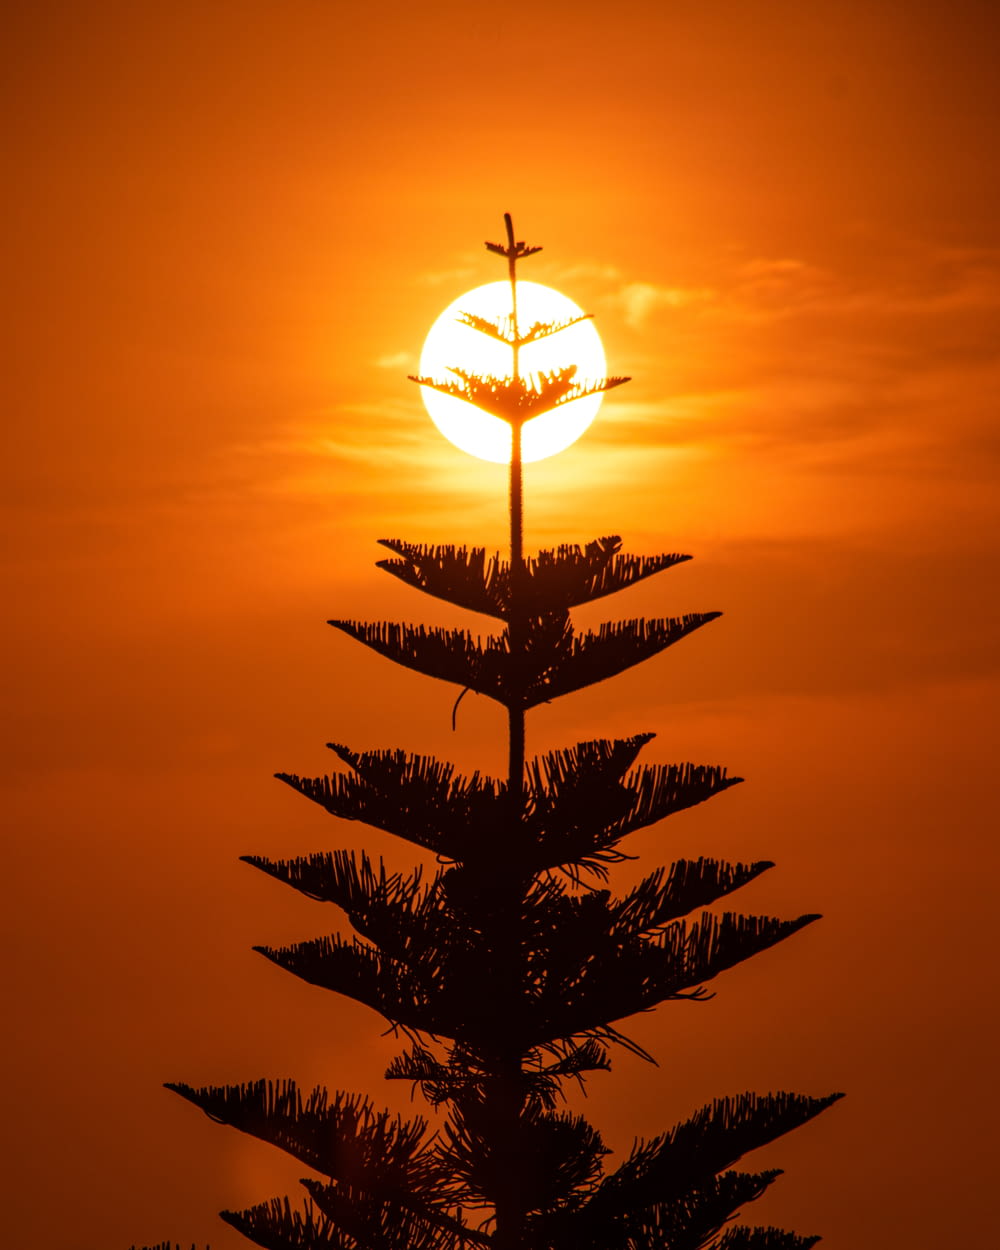 the sun is setting behind a tall tree